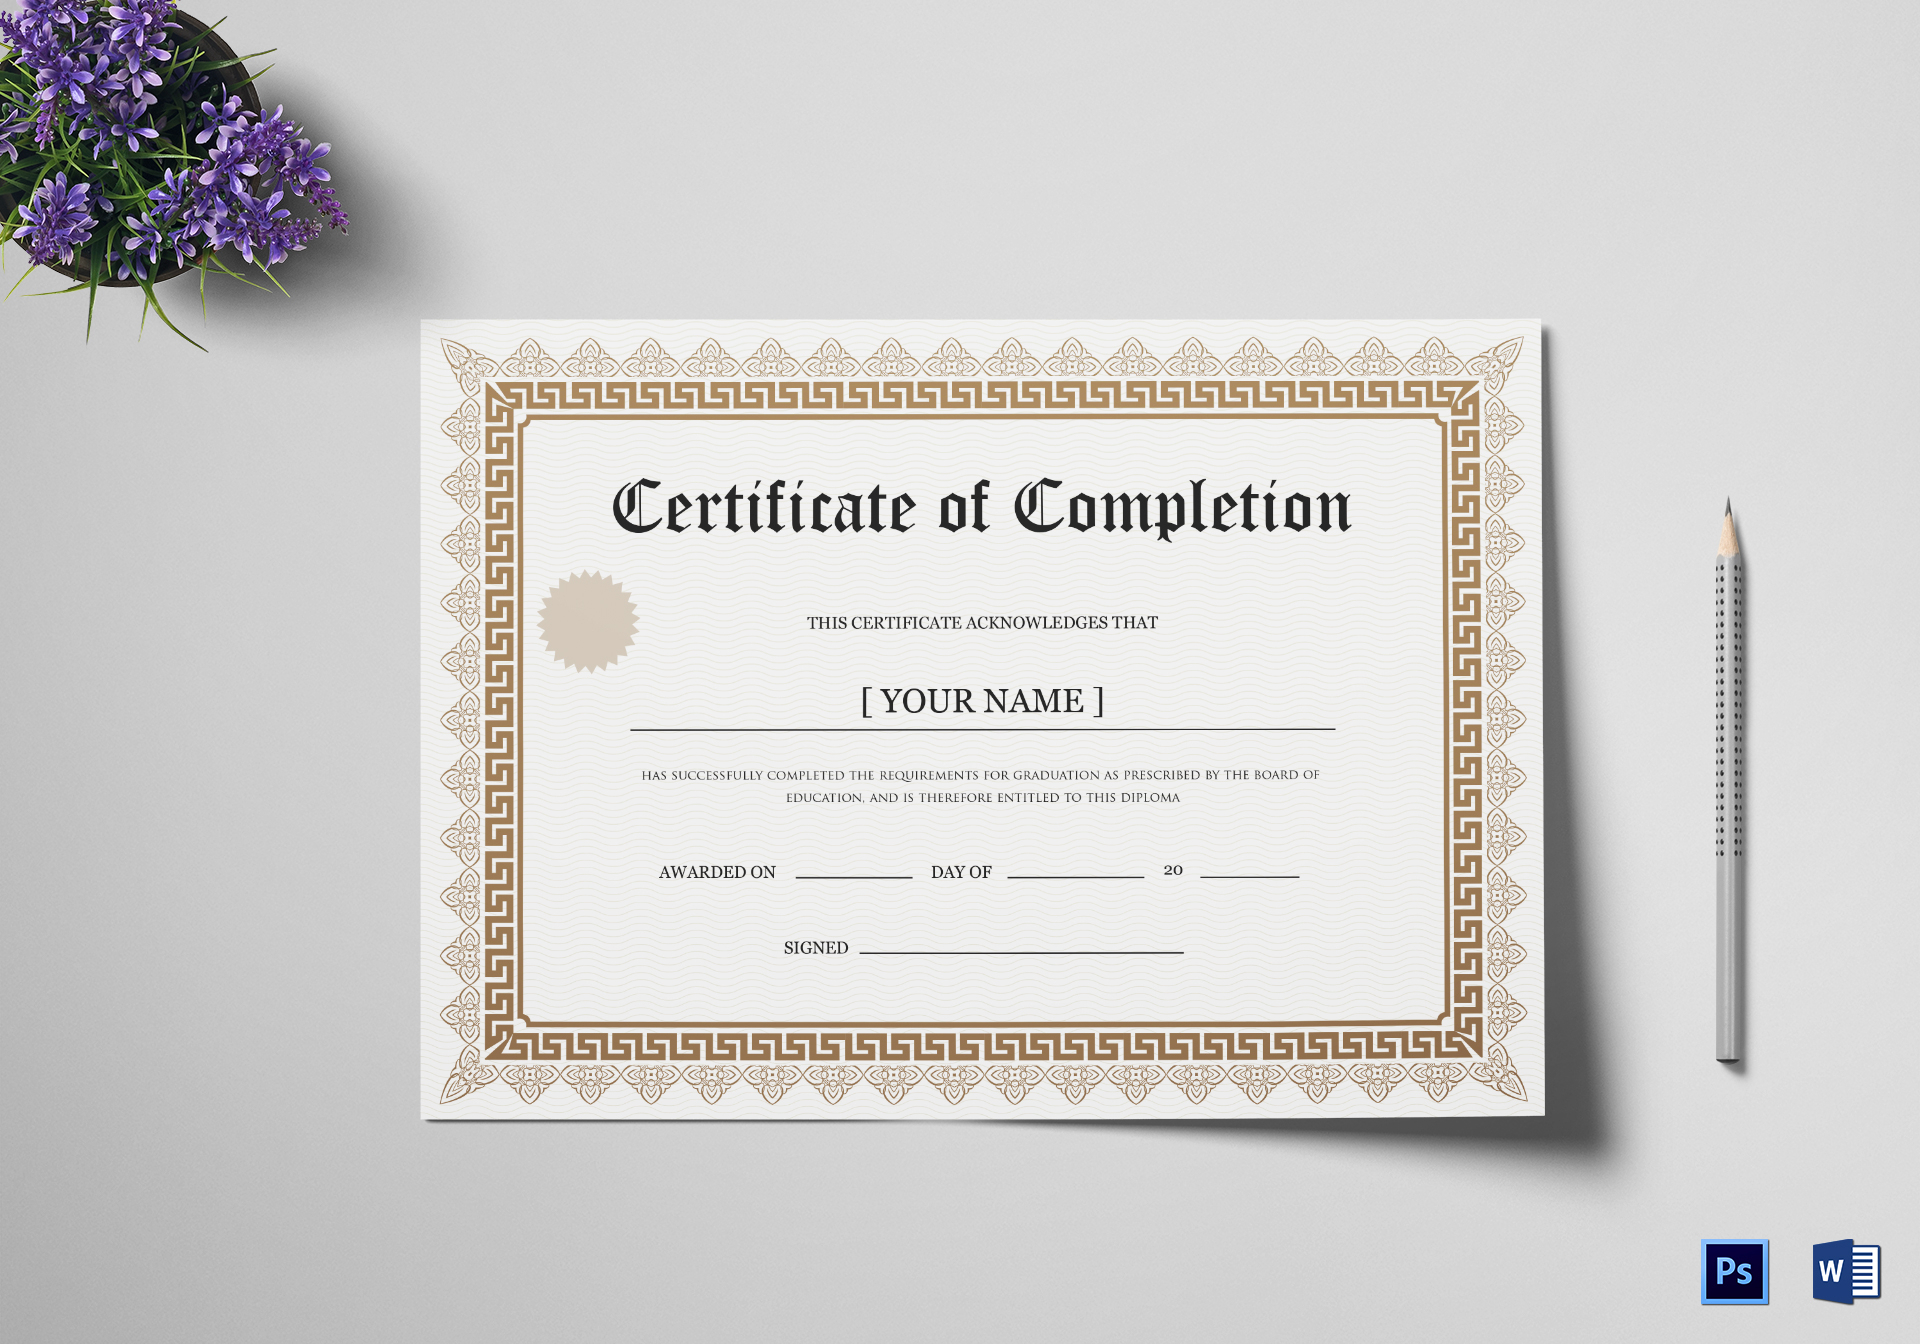 Bachelor Degree Completion Certificate Template Throughout Masters Degree Certificate Template